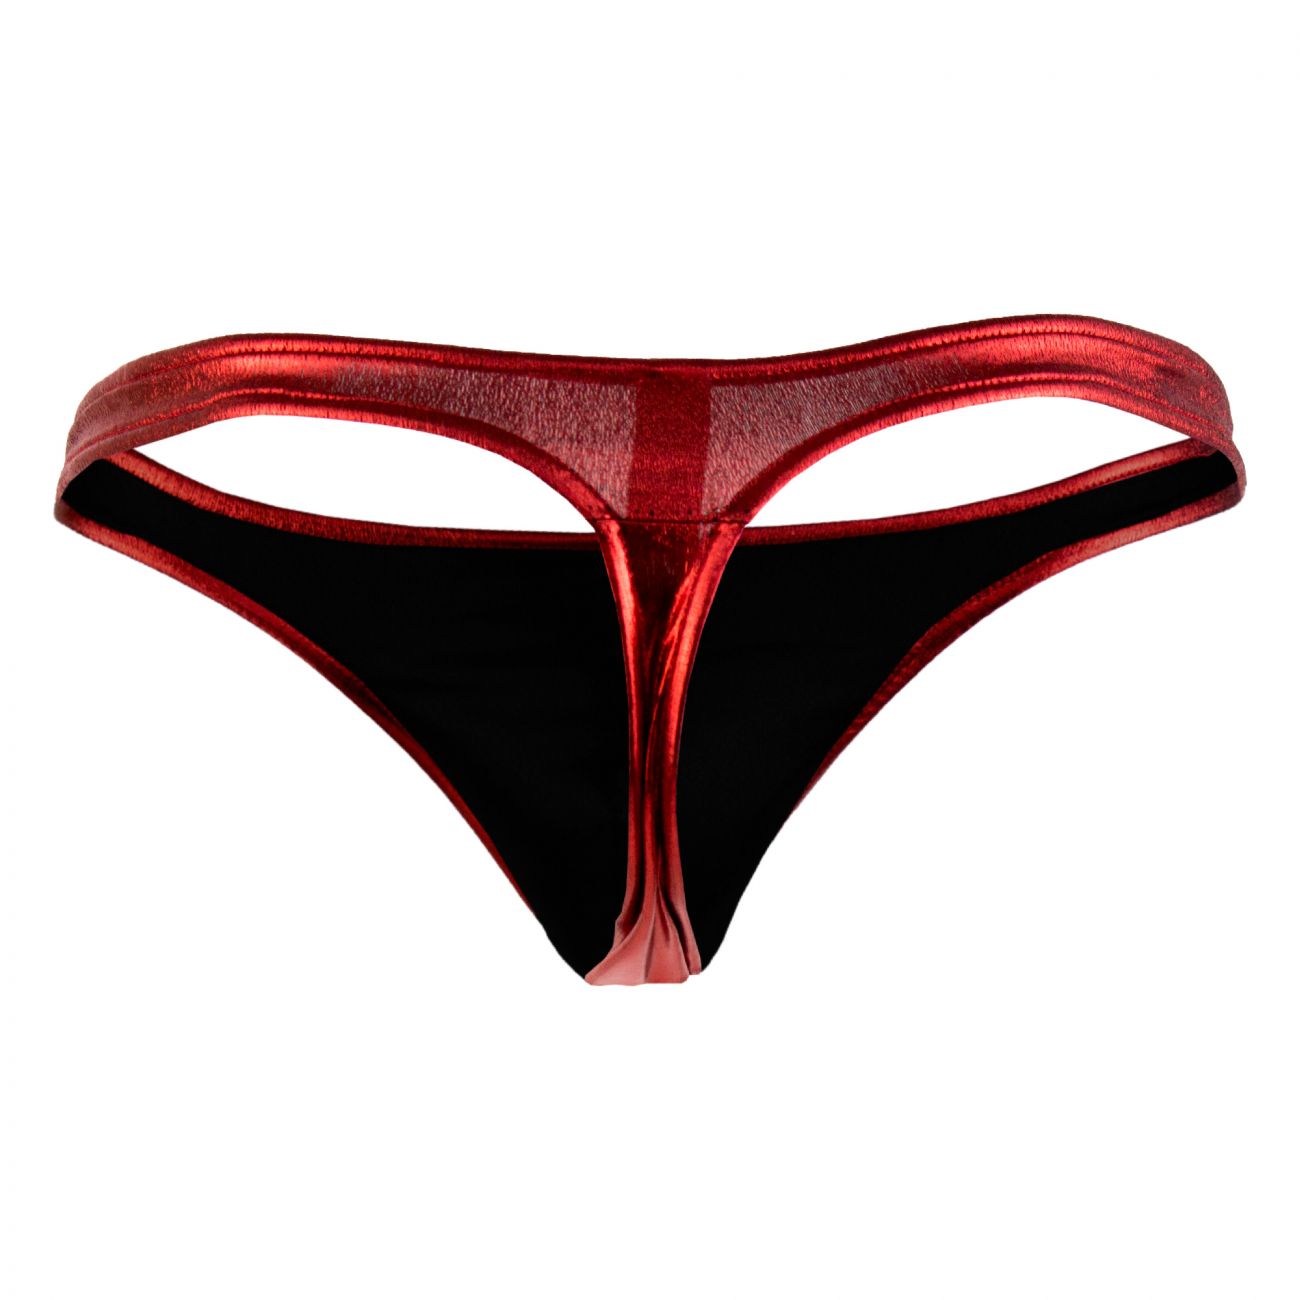 Male Power 442070 Heavy Metal Bong Thong Red